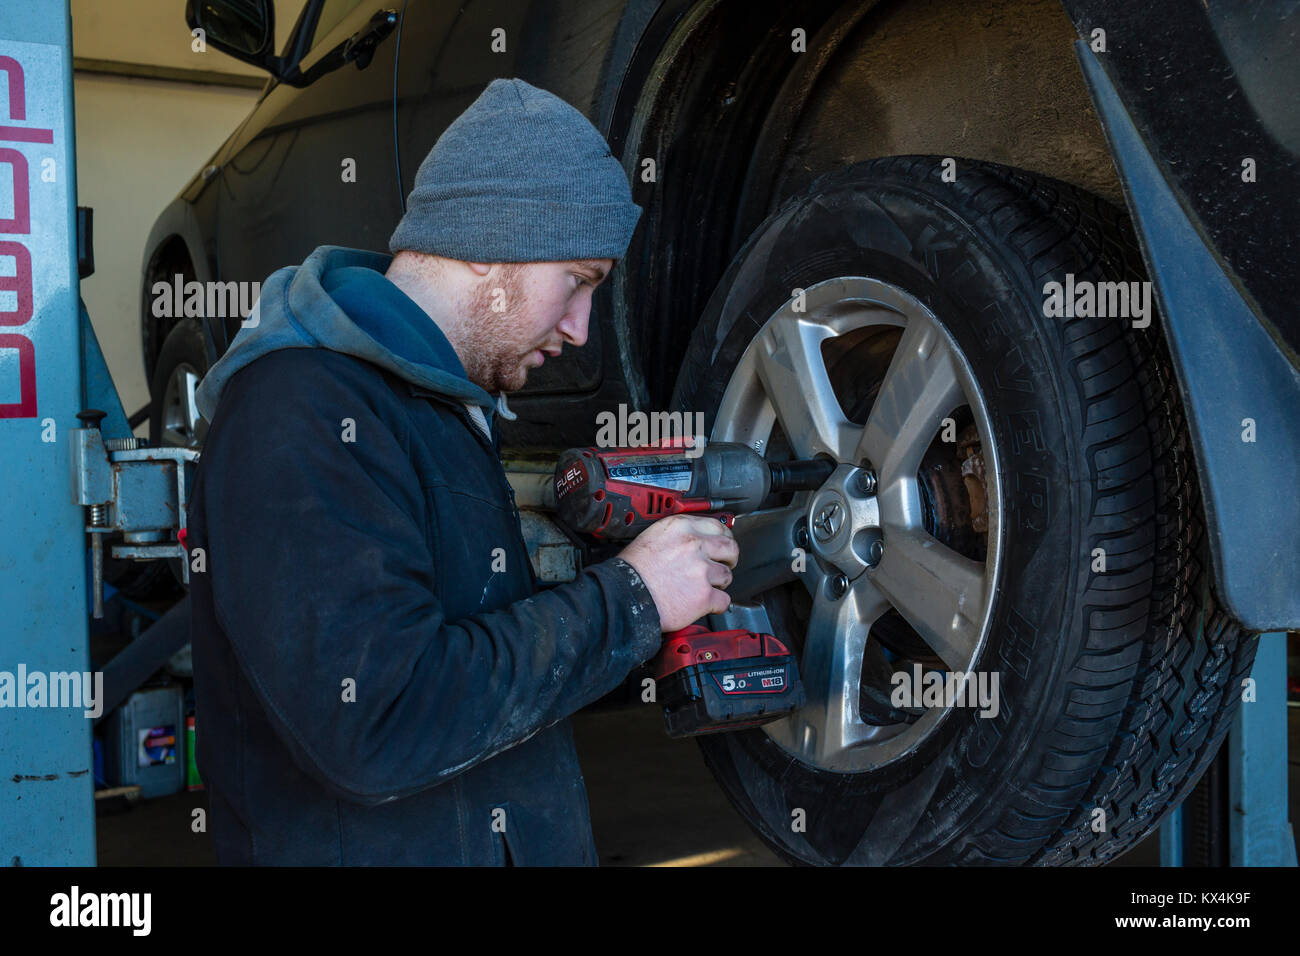 Young Apprentice mechanic removing a car wheel with a cordless impact wrench Stock Photo